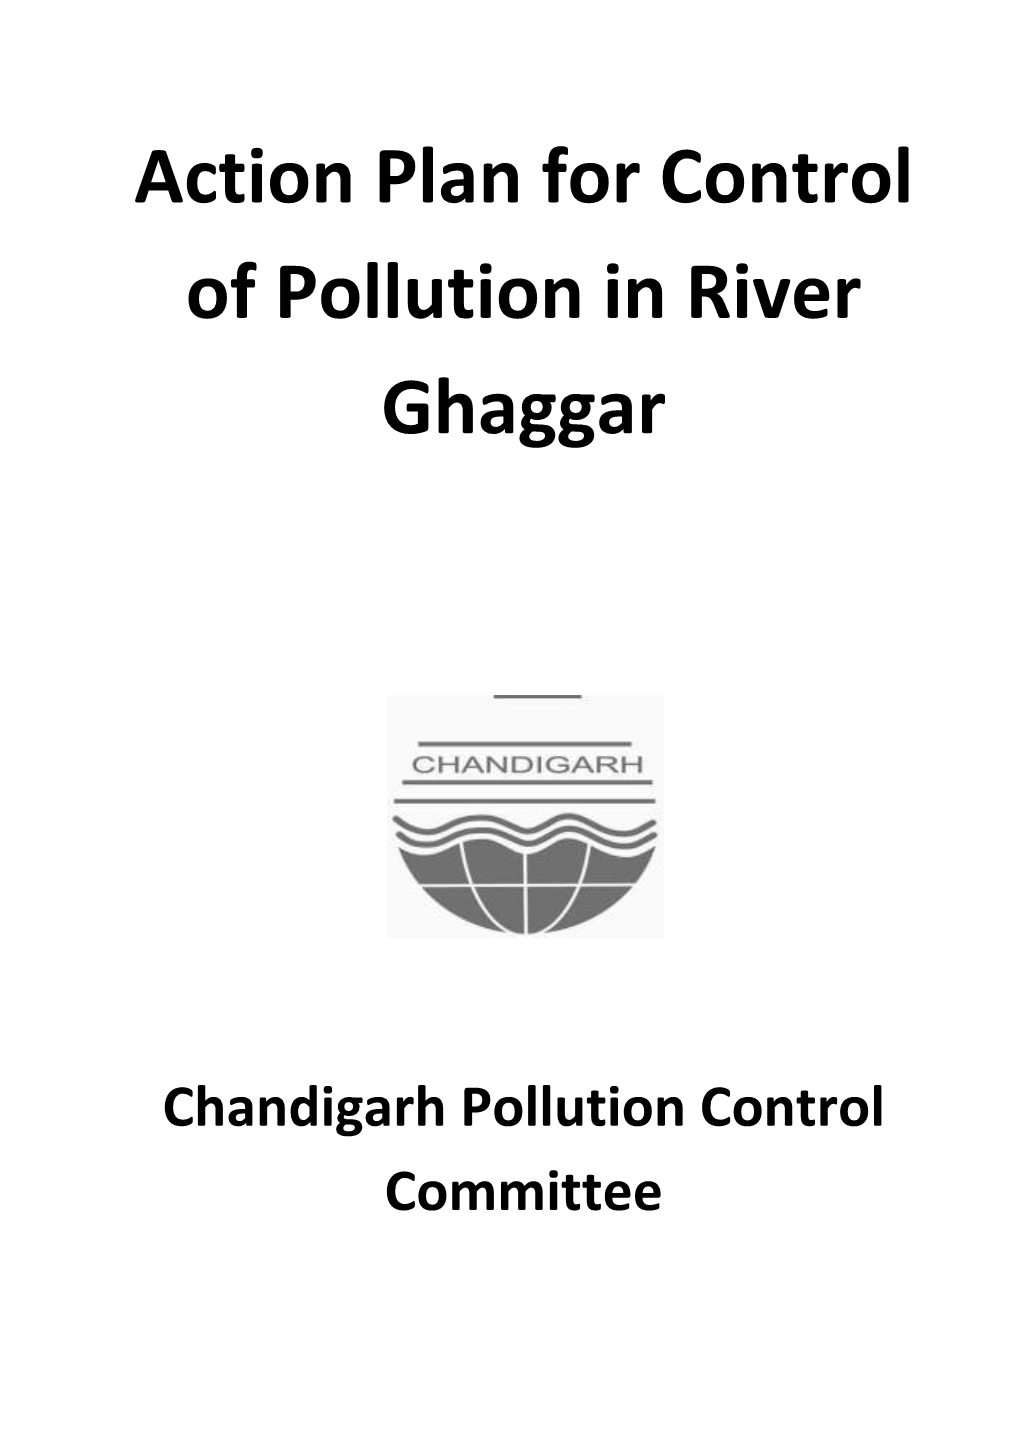 Action Plan for Control of Pollution in River Ghaggar